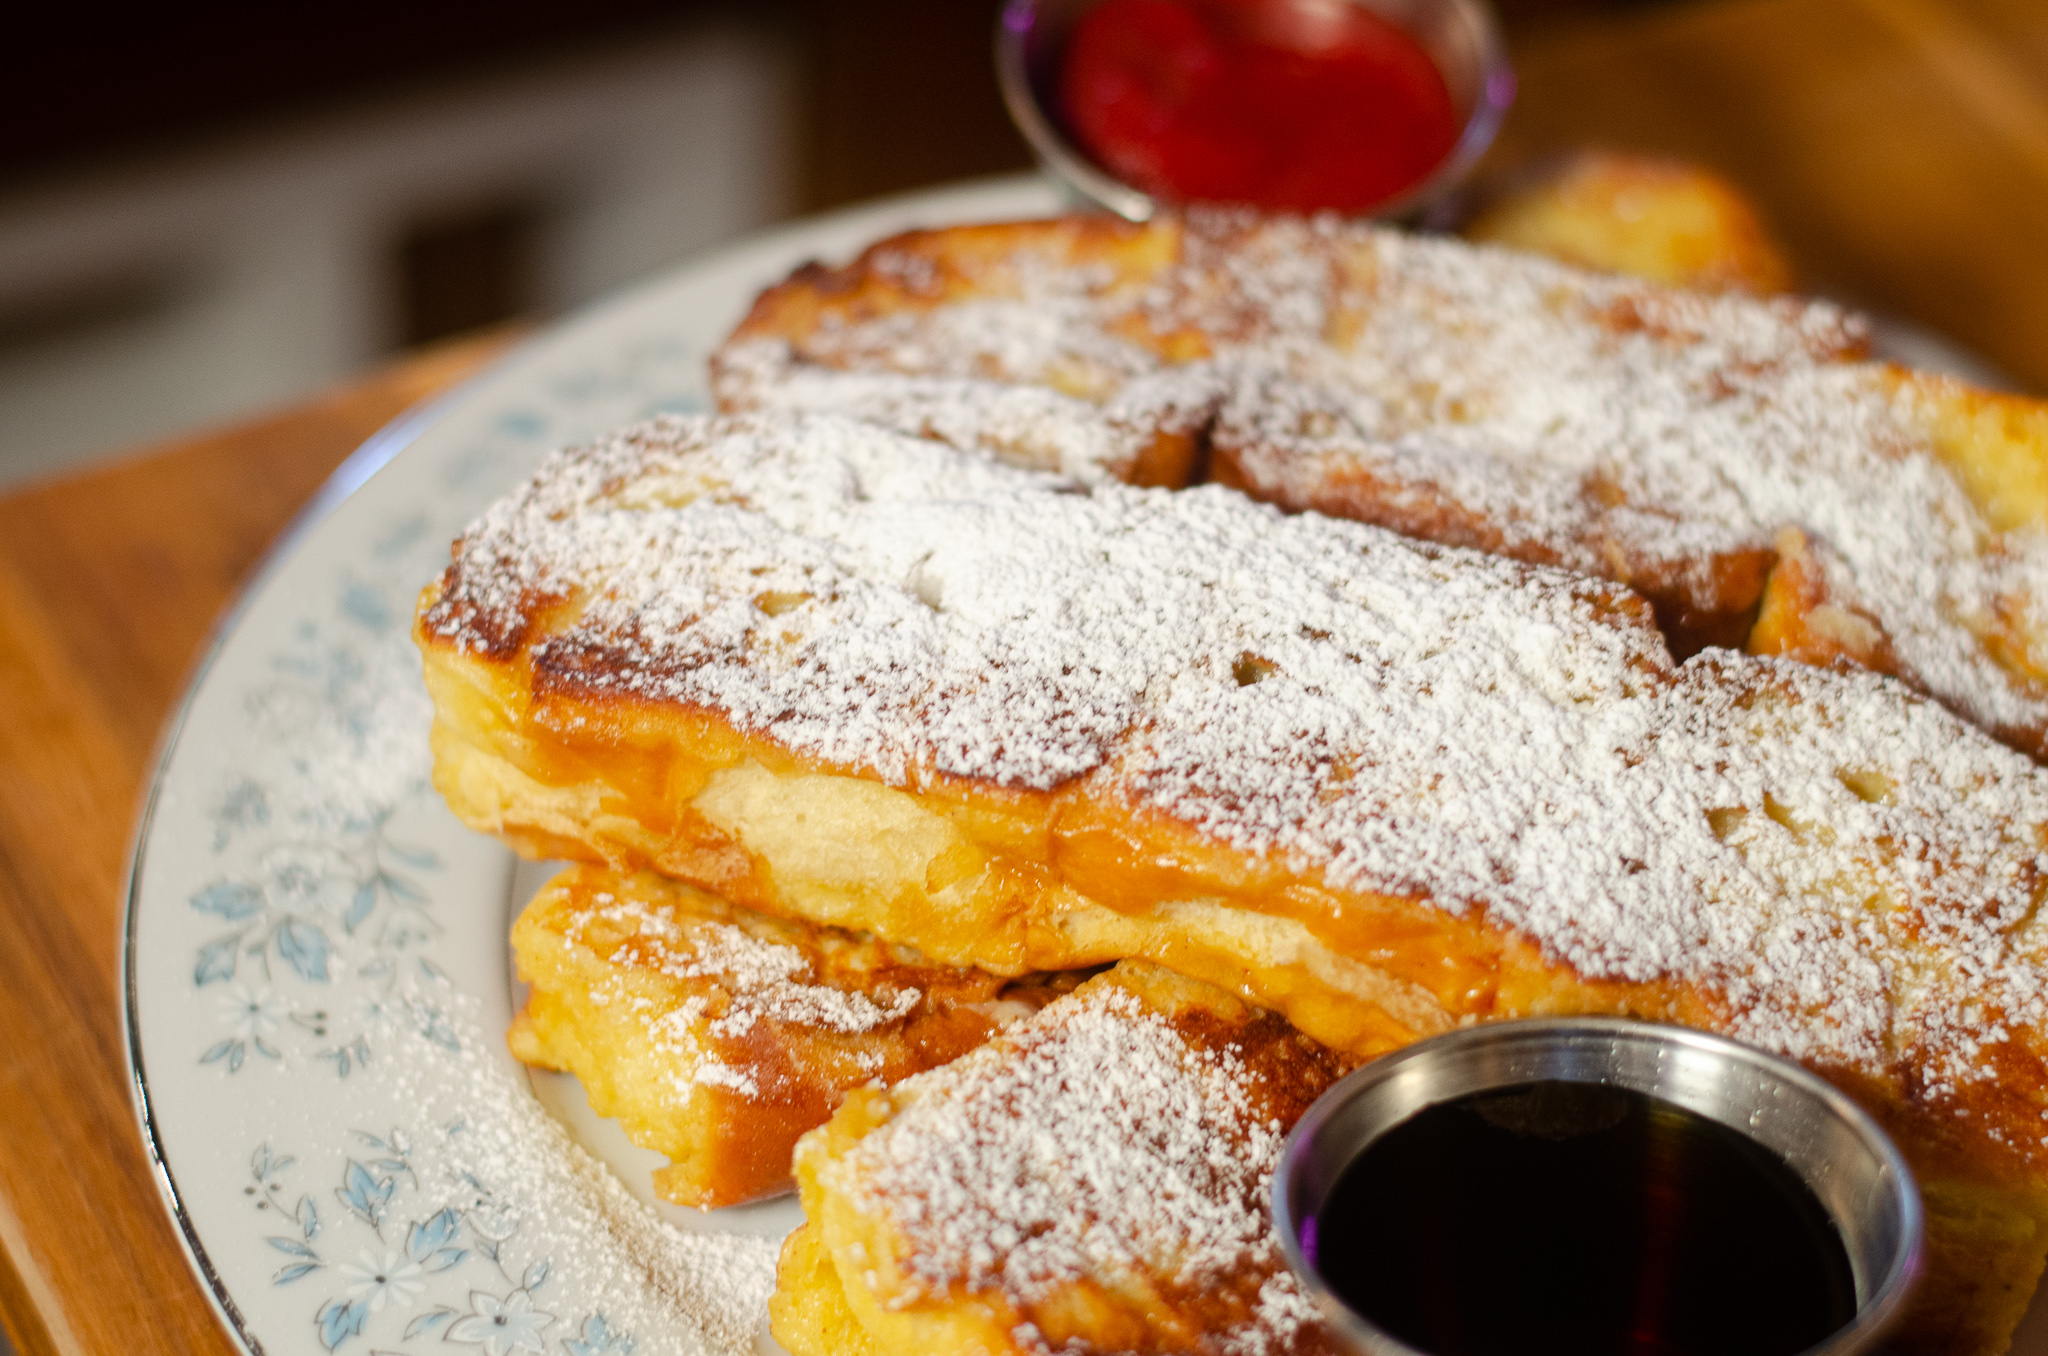 French Toast Dippers on the all day brunch menu at WindsorEats in Windsor, Ontario.